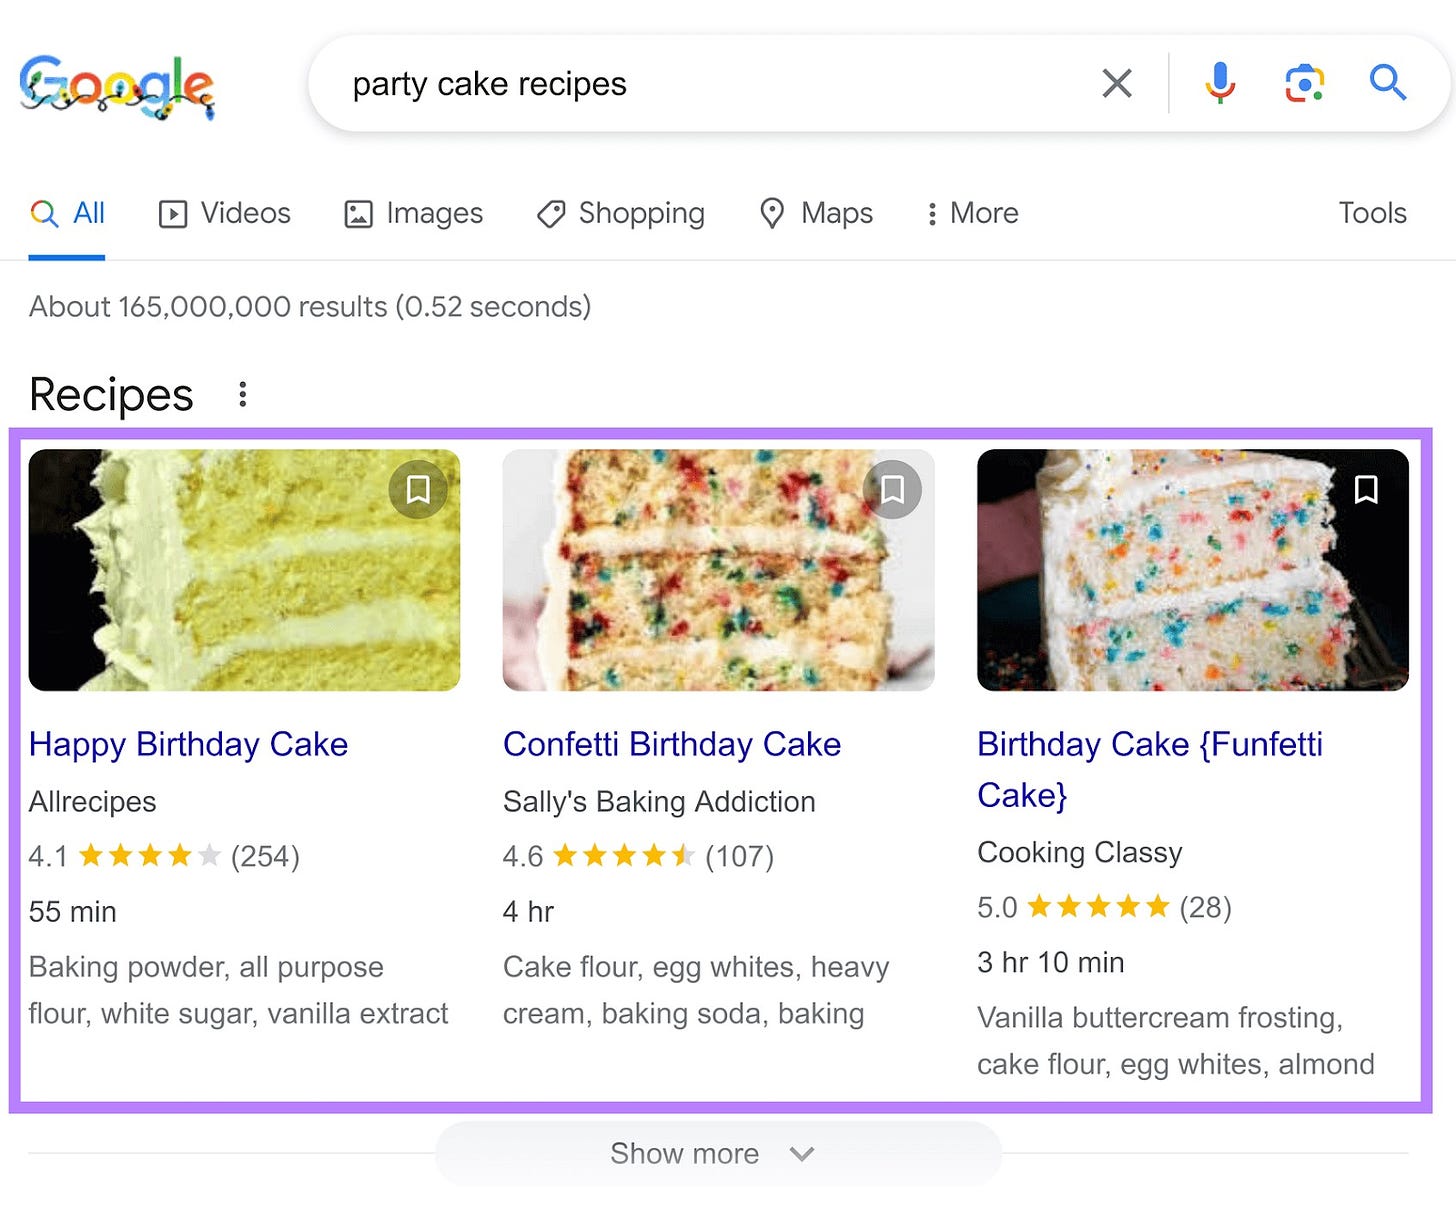 Google's rich results for party cake recipes including images, star rating, review count, cooking time, and recipe ingredients